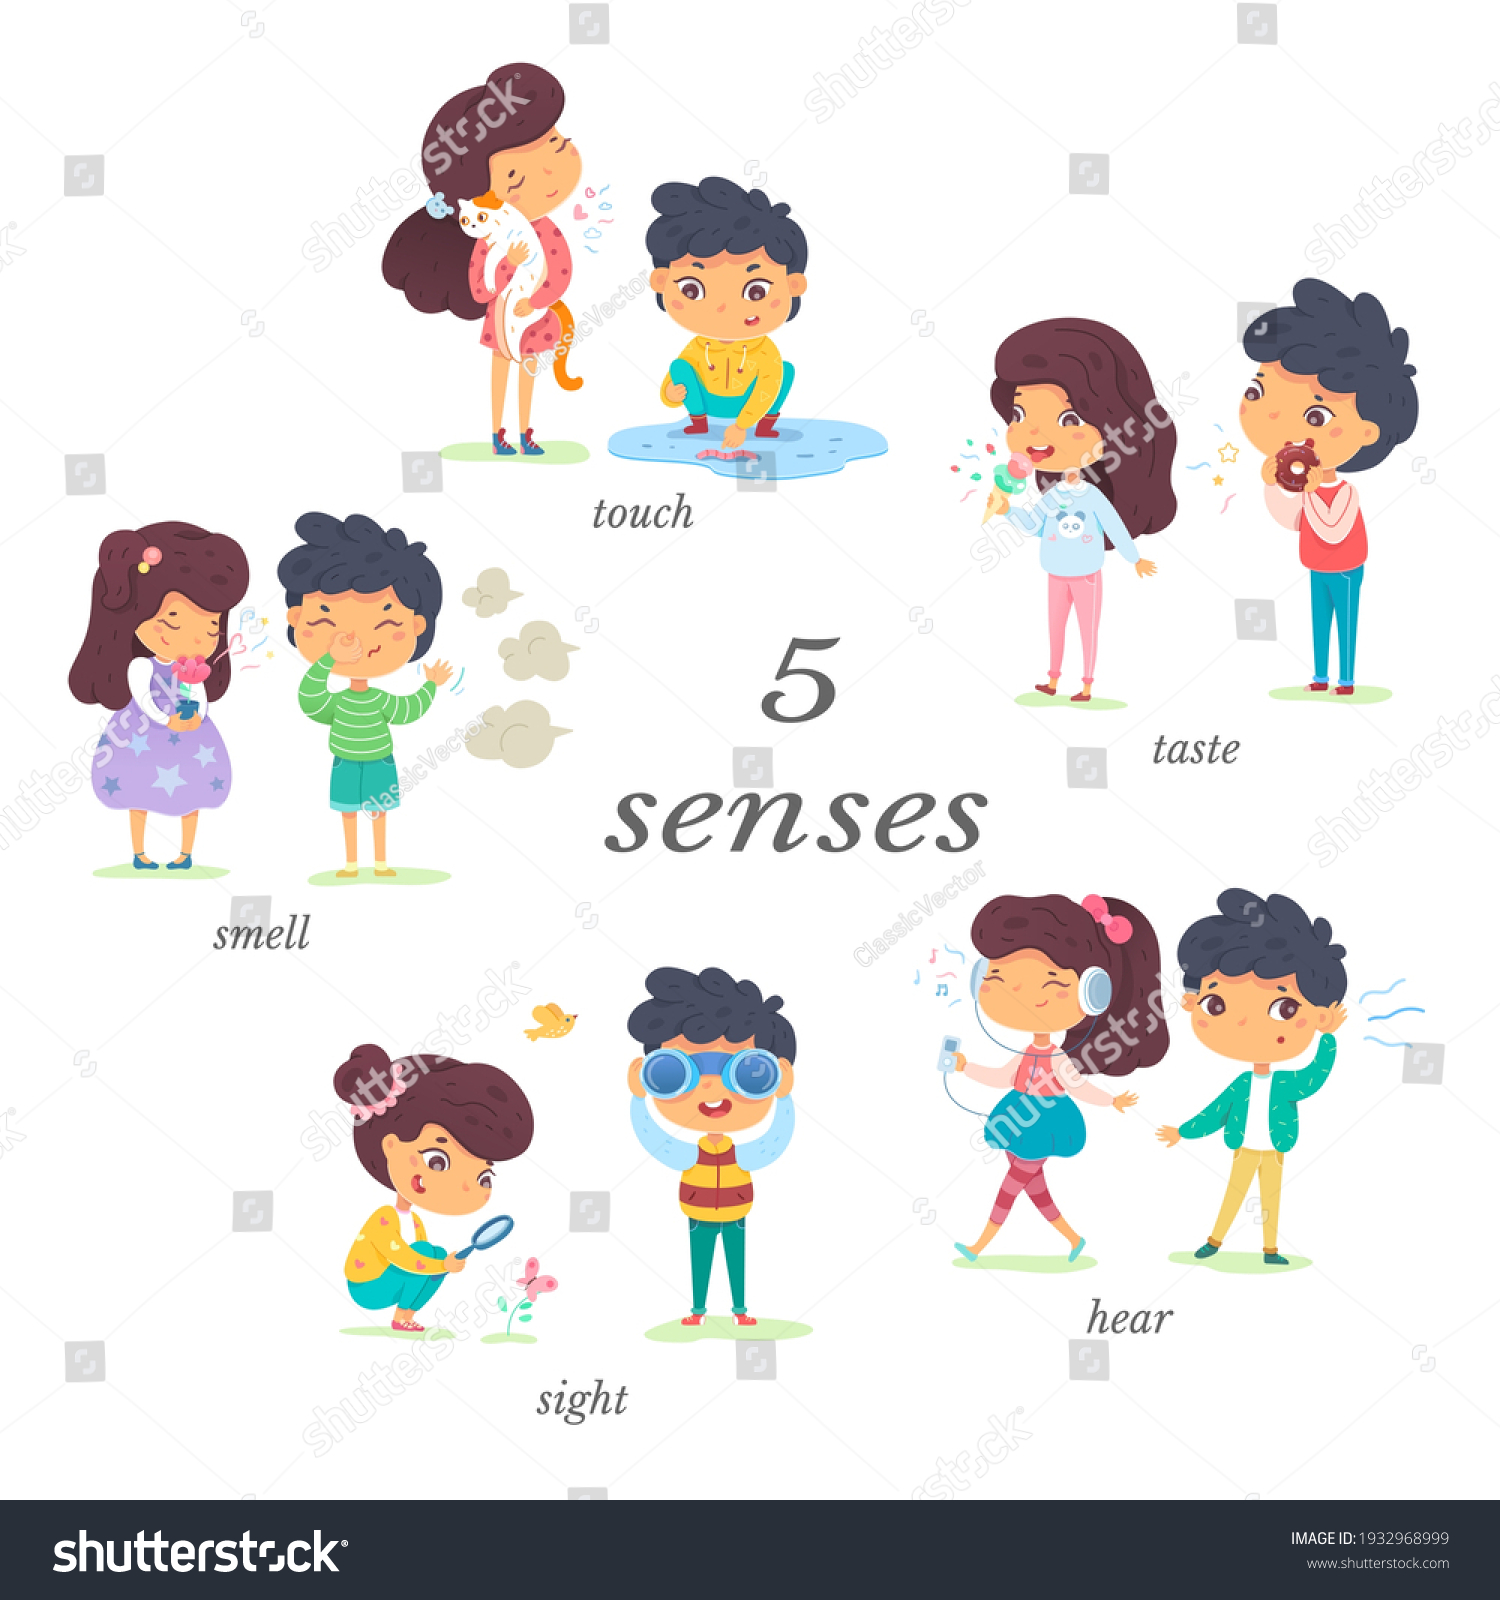 Boy and girl showing five senses set. Sense of sight, touch, hear, smell, taste vector illustration. Small happy children in nature and exploring wonders of spring. Joyful education at childhood. #1932968999